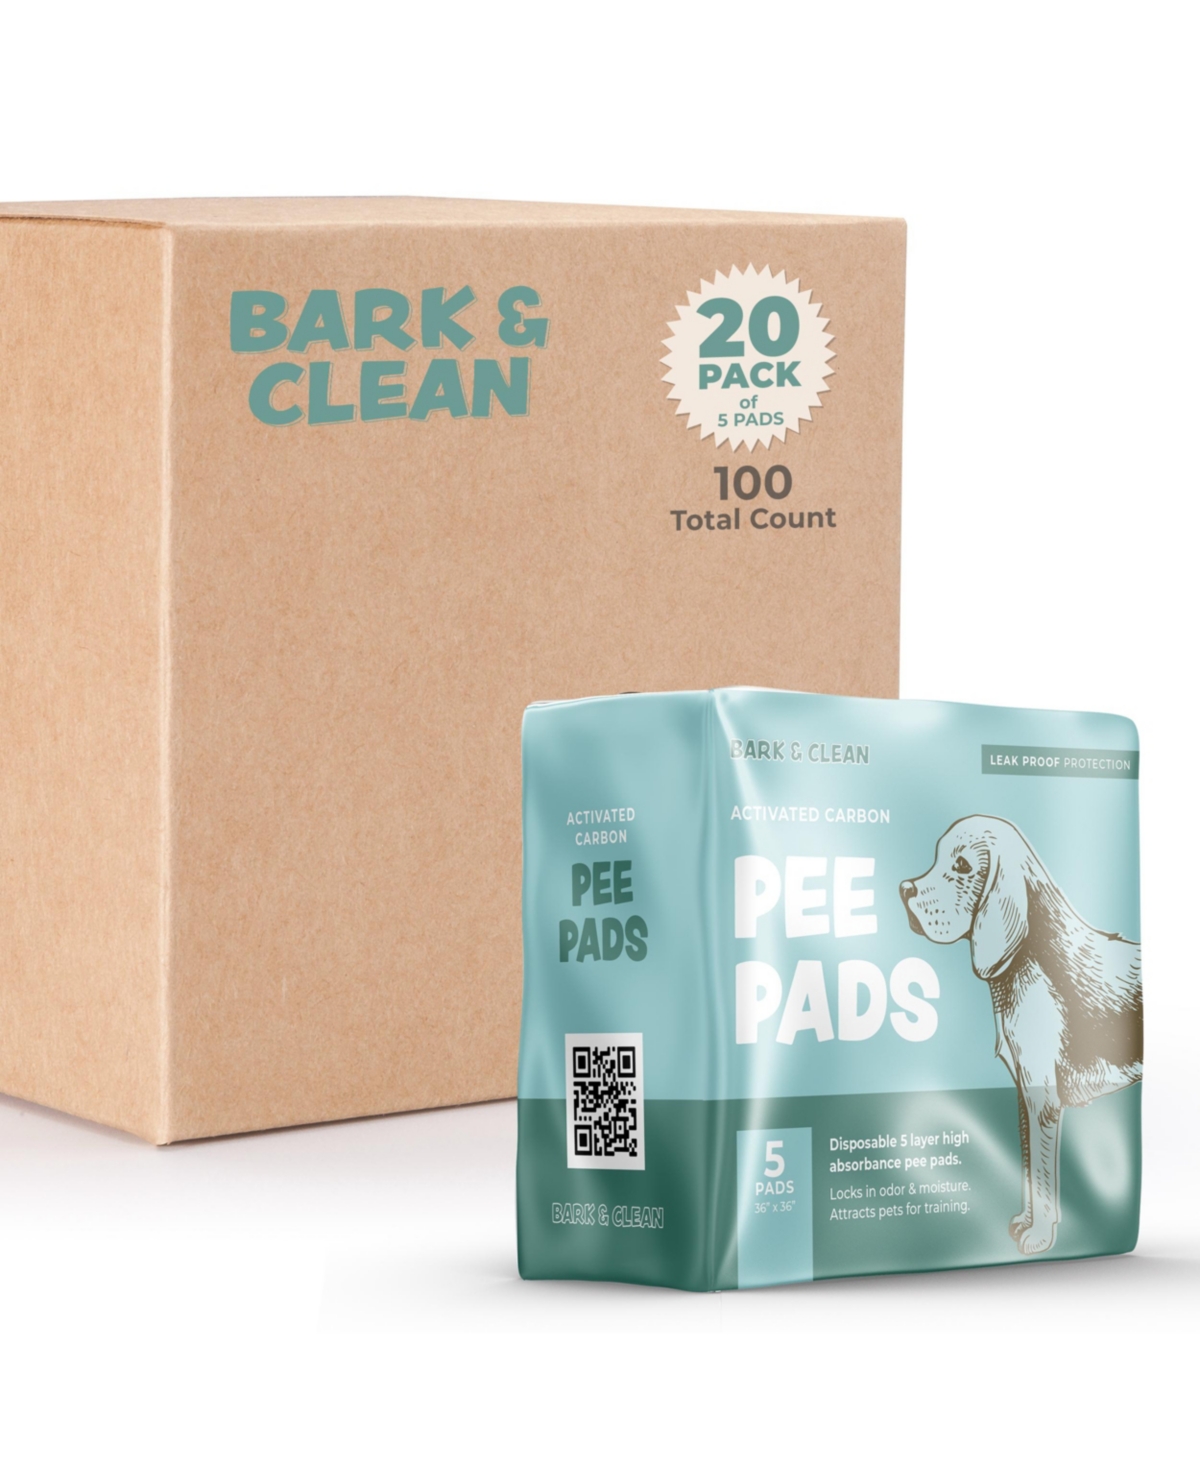 Traveler's Dog and Puppy Pee Pads, Leak-Proof Design, Heavy Duty Absorbency, 36" x 36", 20 Packs of 5 Pads - Charcoal